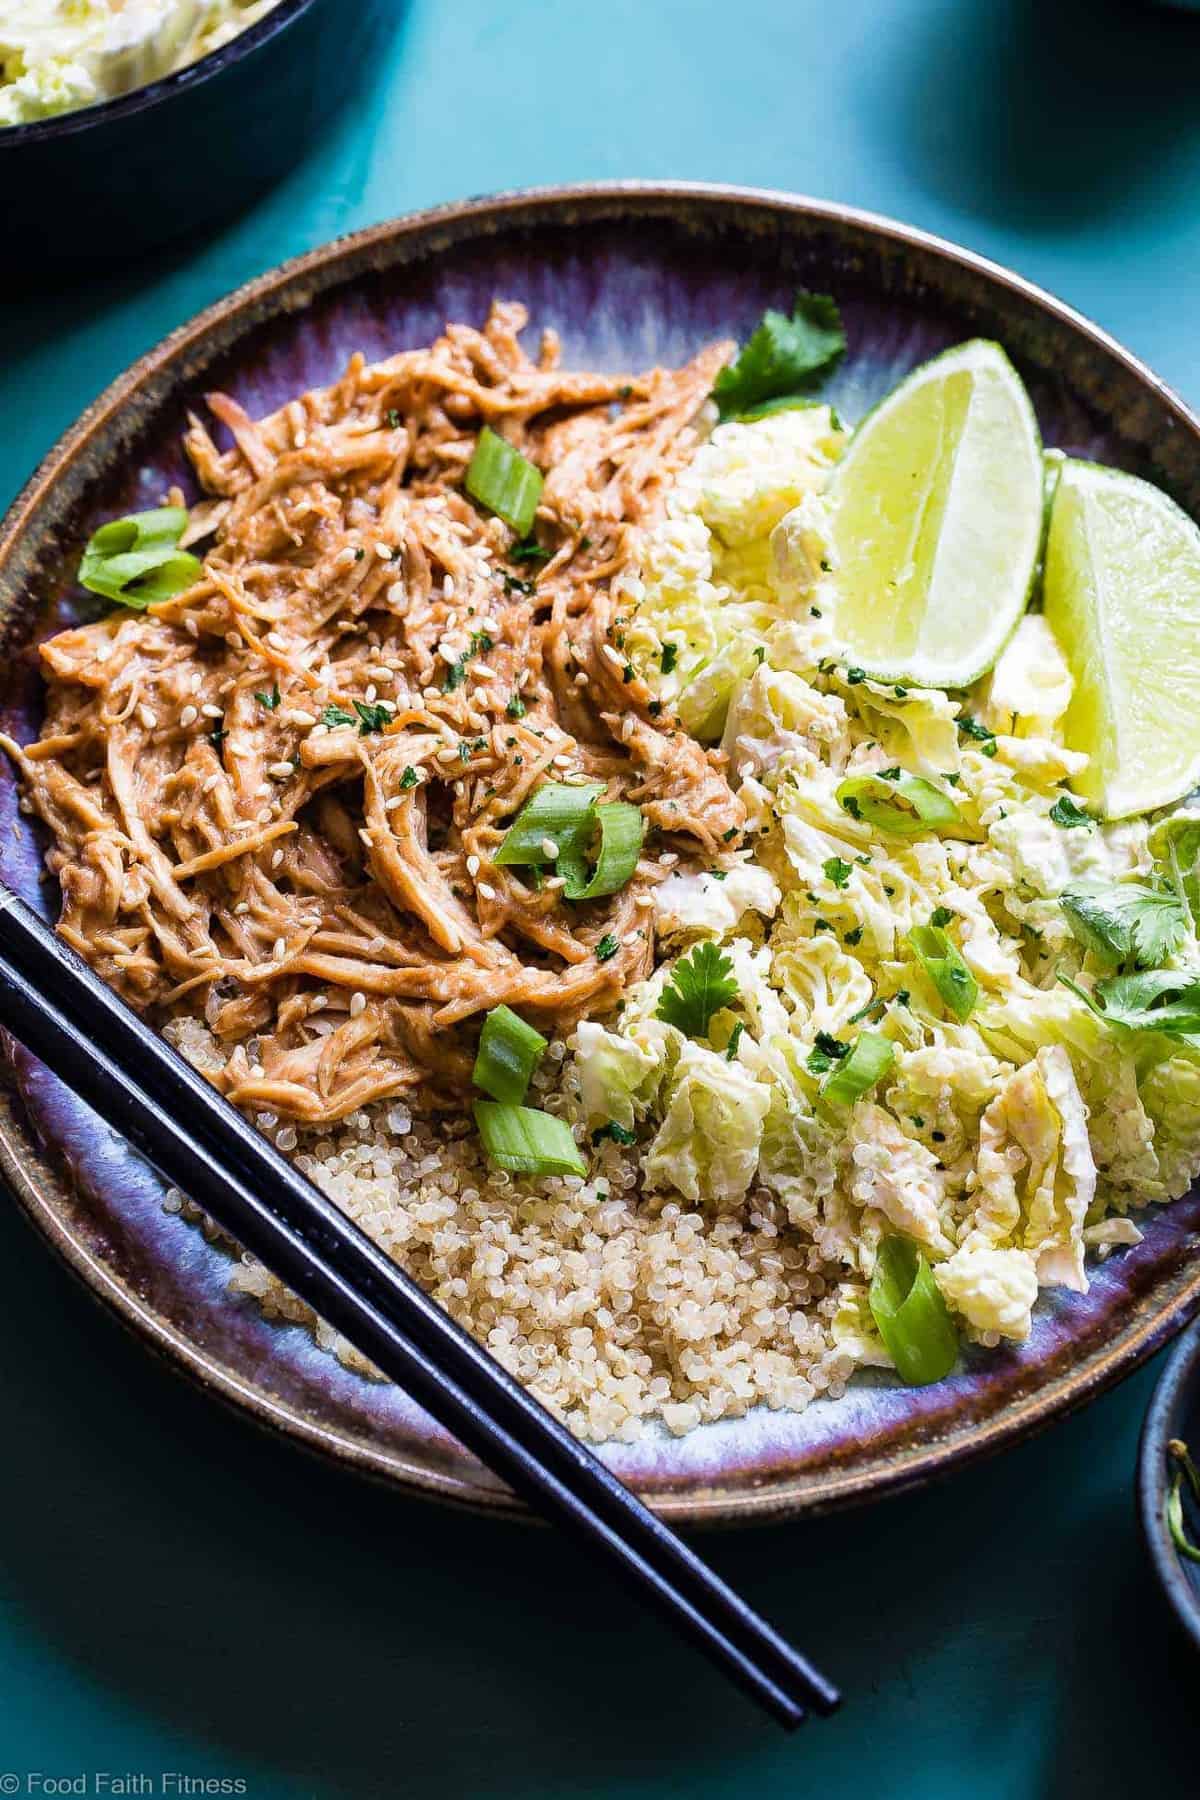 Slow Cooker Thai Peanut Chicken Quinoa Bowls - CREAMY crockpot Thai peanut chicken is mixed with quinoa and a spicy cabbage slaw to make a family friendly, gluten free and healthy meal! The slow cooker does the work for you! | #Foodfaithfitness | #Glutenfree #Dairyfree #Healthy #Slowcooker #Crockpot